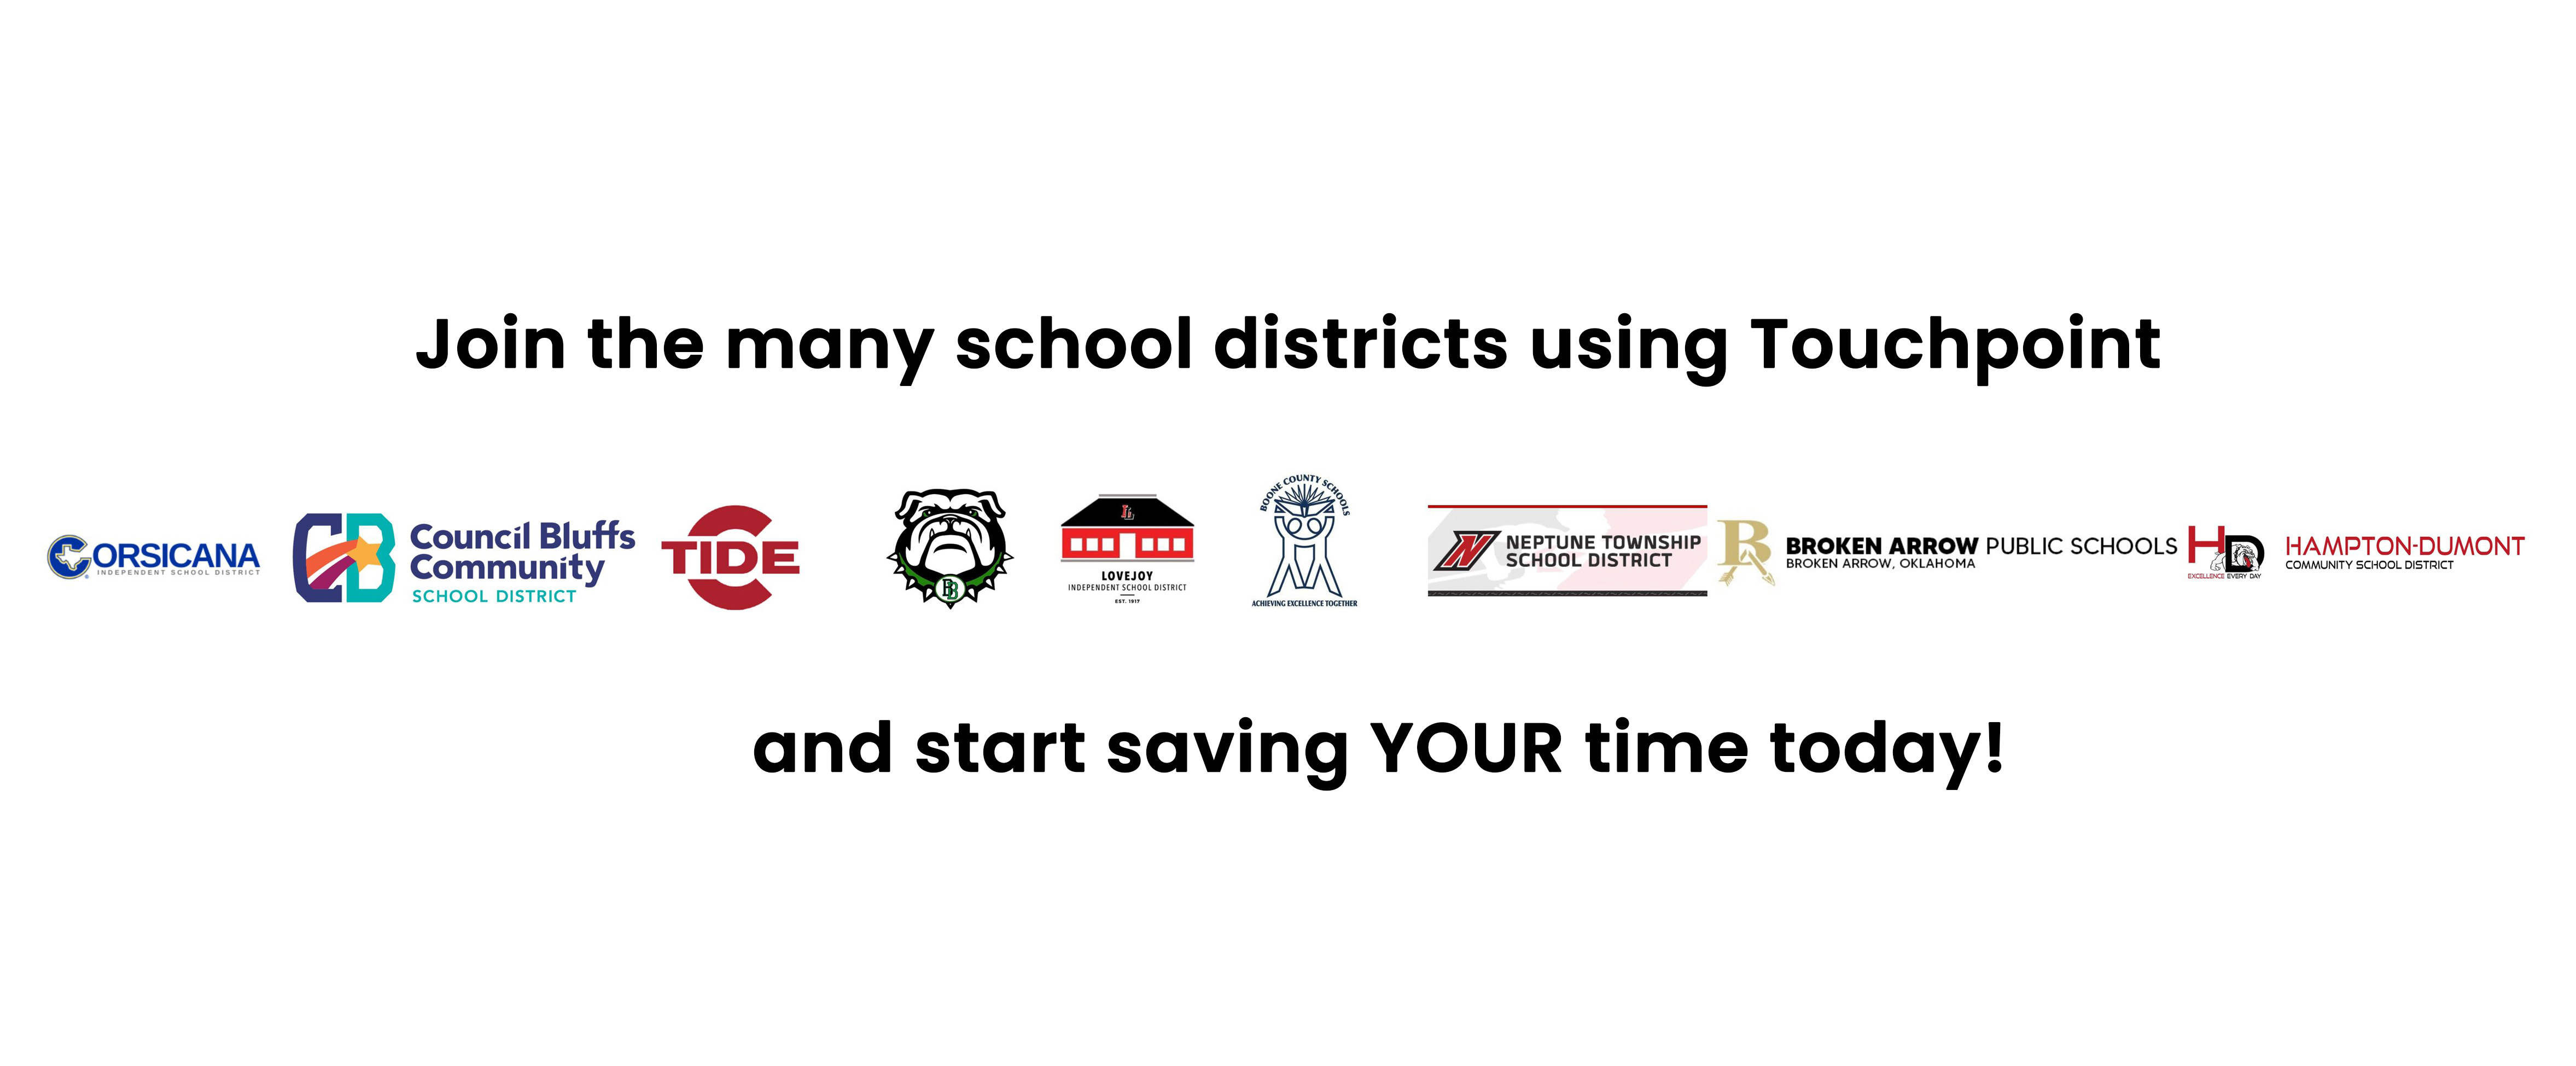 Touchpoint Other School logos